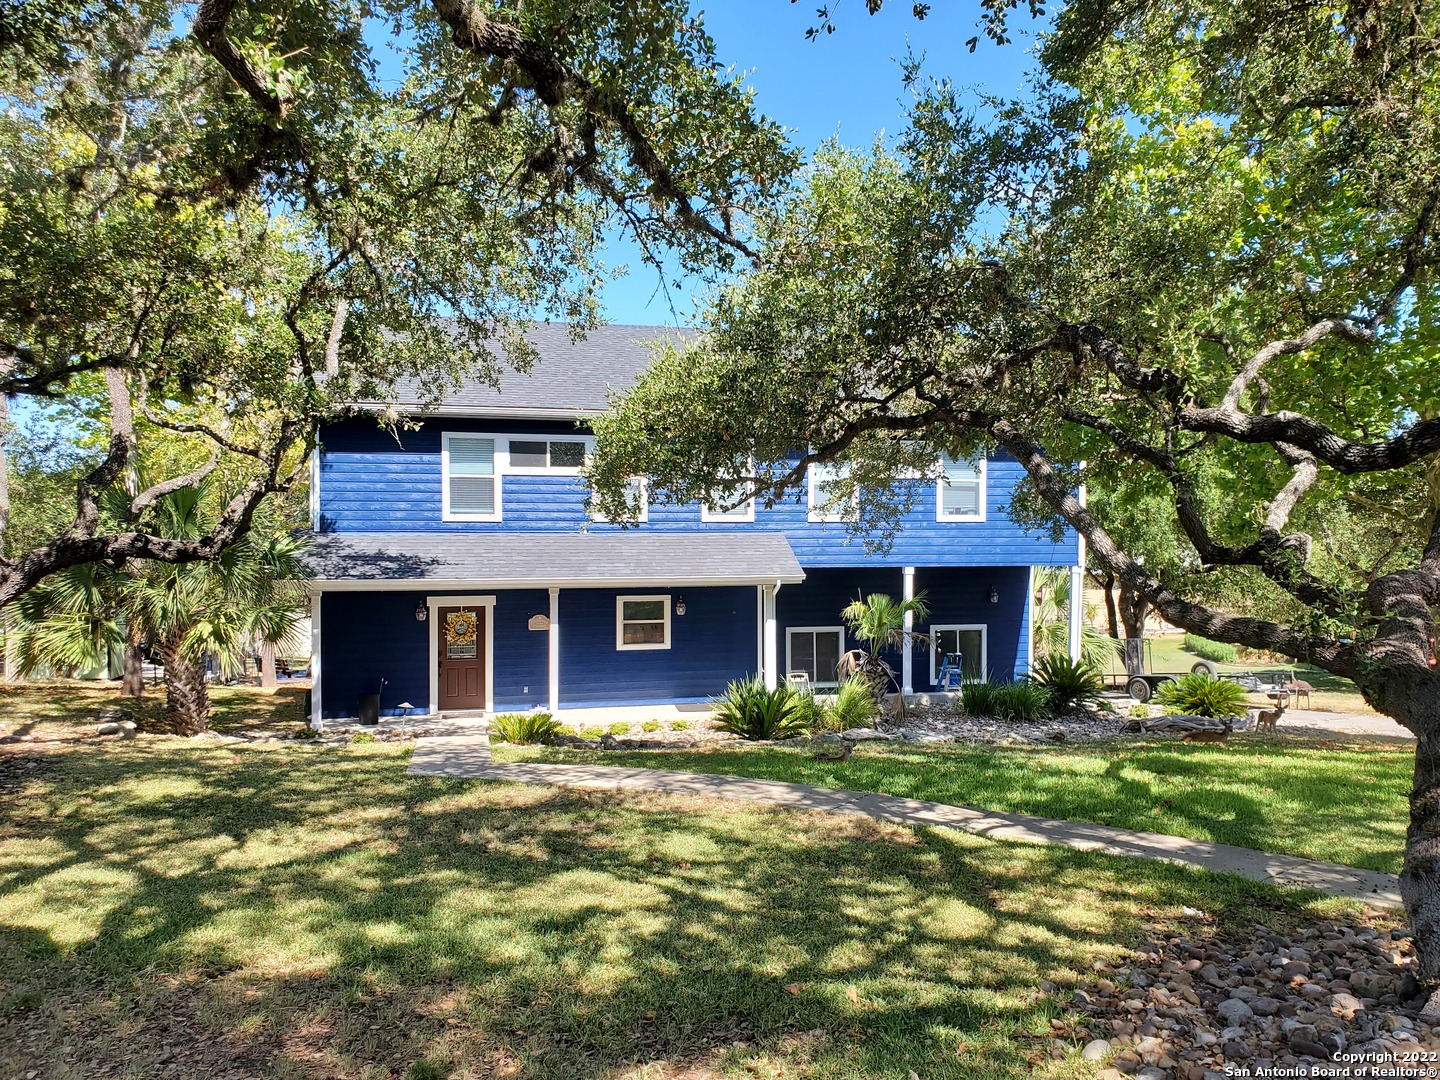 Fully remodeled water front home built 2005,aprox. 2568 sqft*2 beautiful oak treed lots approx .84 acre*kitchen-42" custom wood cabinets, quartz countertops, tile backsplash, 8ft island,stainless steel, builtin double ovens, microwave, dishwasher, refrigerator+black smooth cooktop*2 huge arched windows w/view of lake*2a/c units, utility room w/sink,washer, dryer& freezer *double pane windows*23'x29'garage+height works for boat w/tower*covered dock*2 decks*huge covered patio by lake*swim,boat,fish,ski+great sunsets